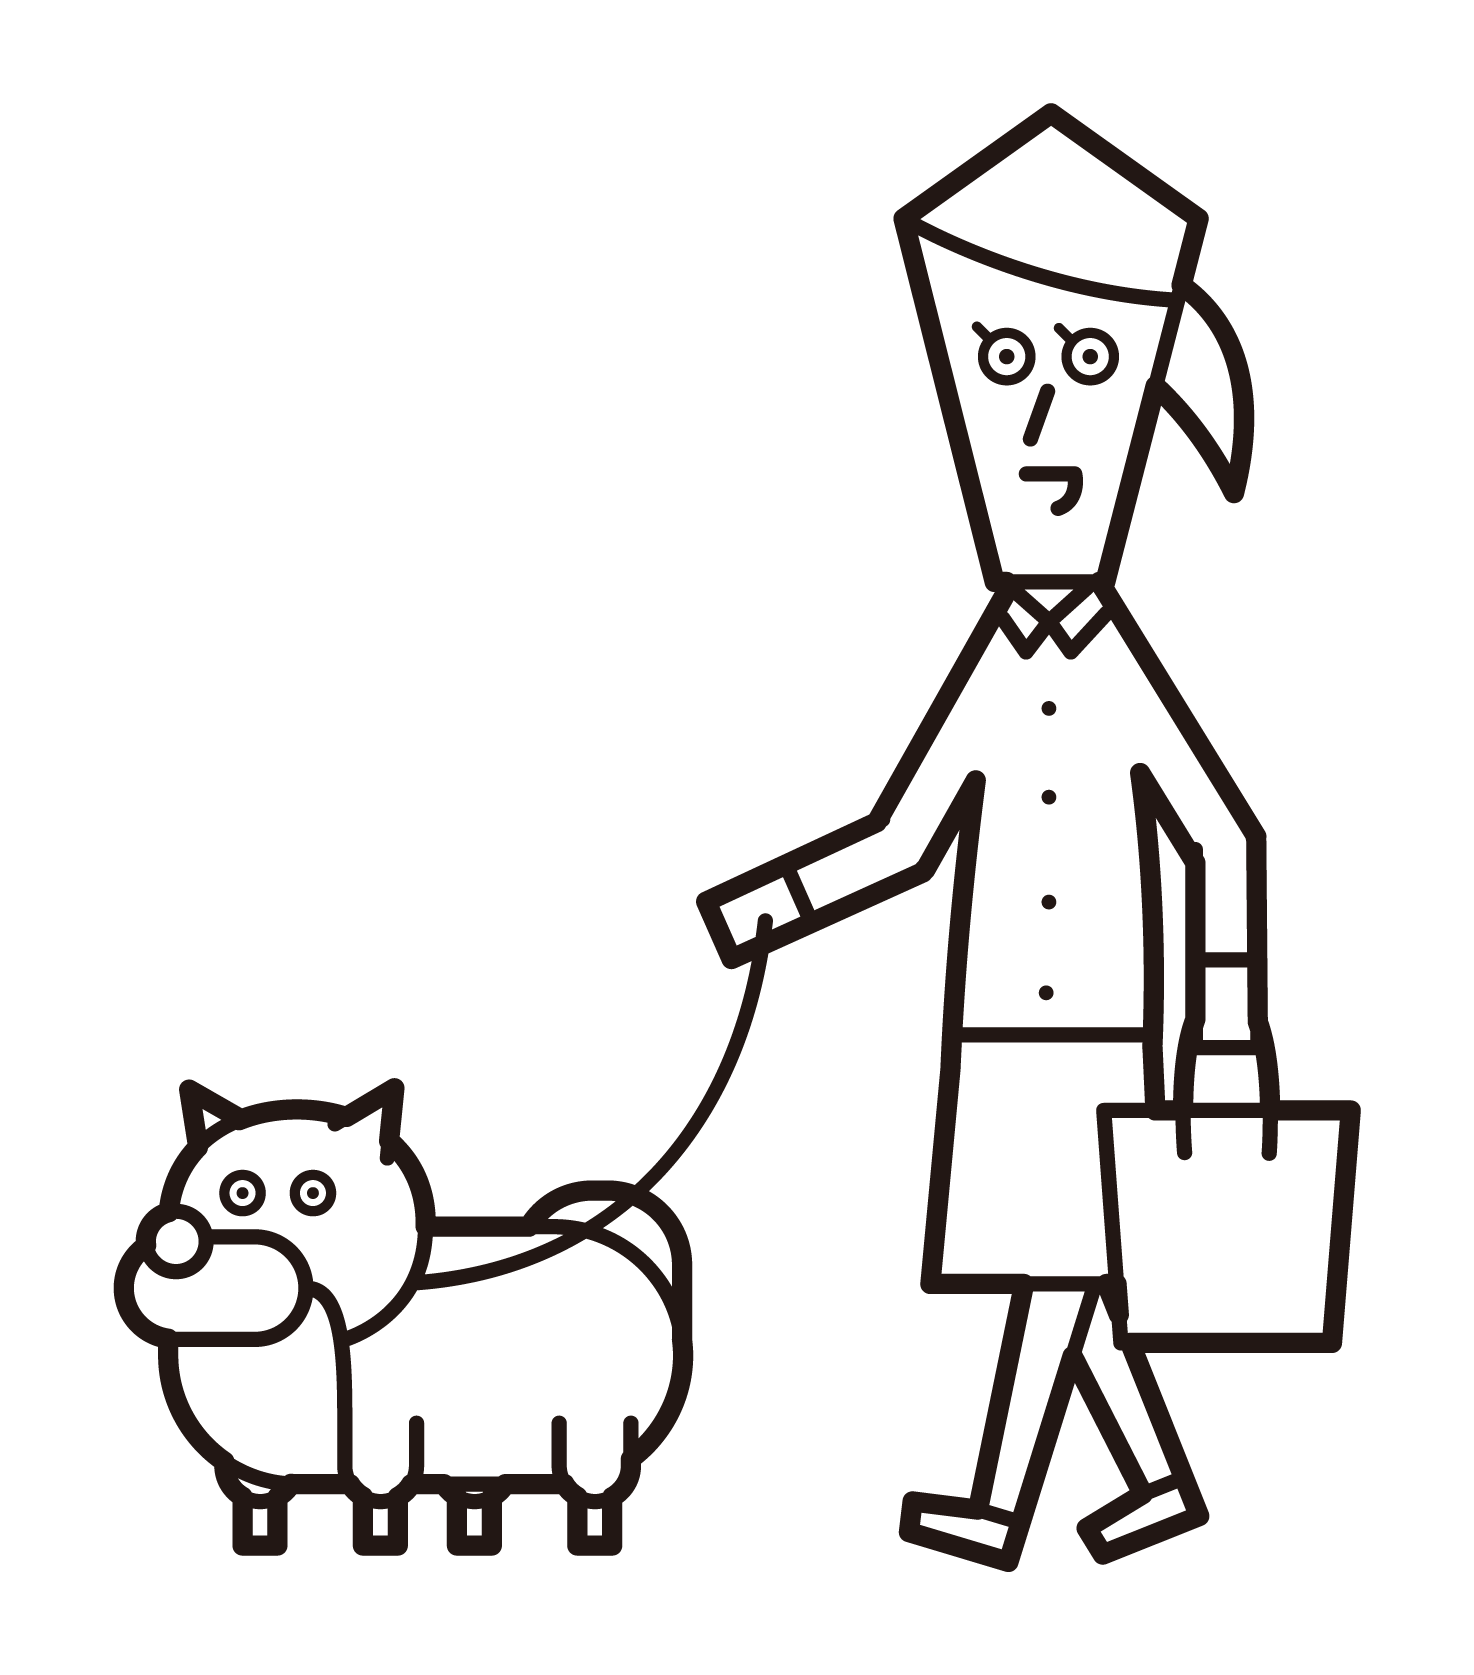 Illustration of a woman walking a dog